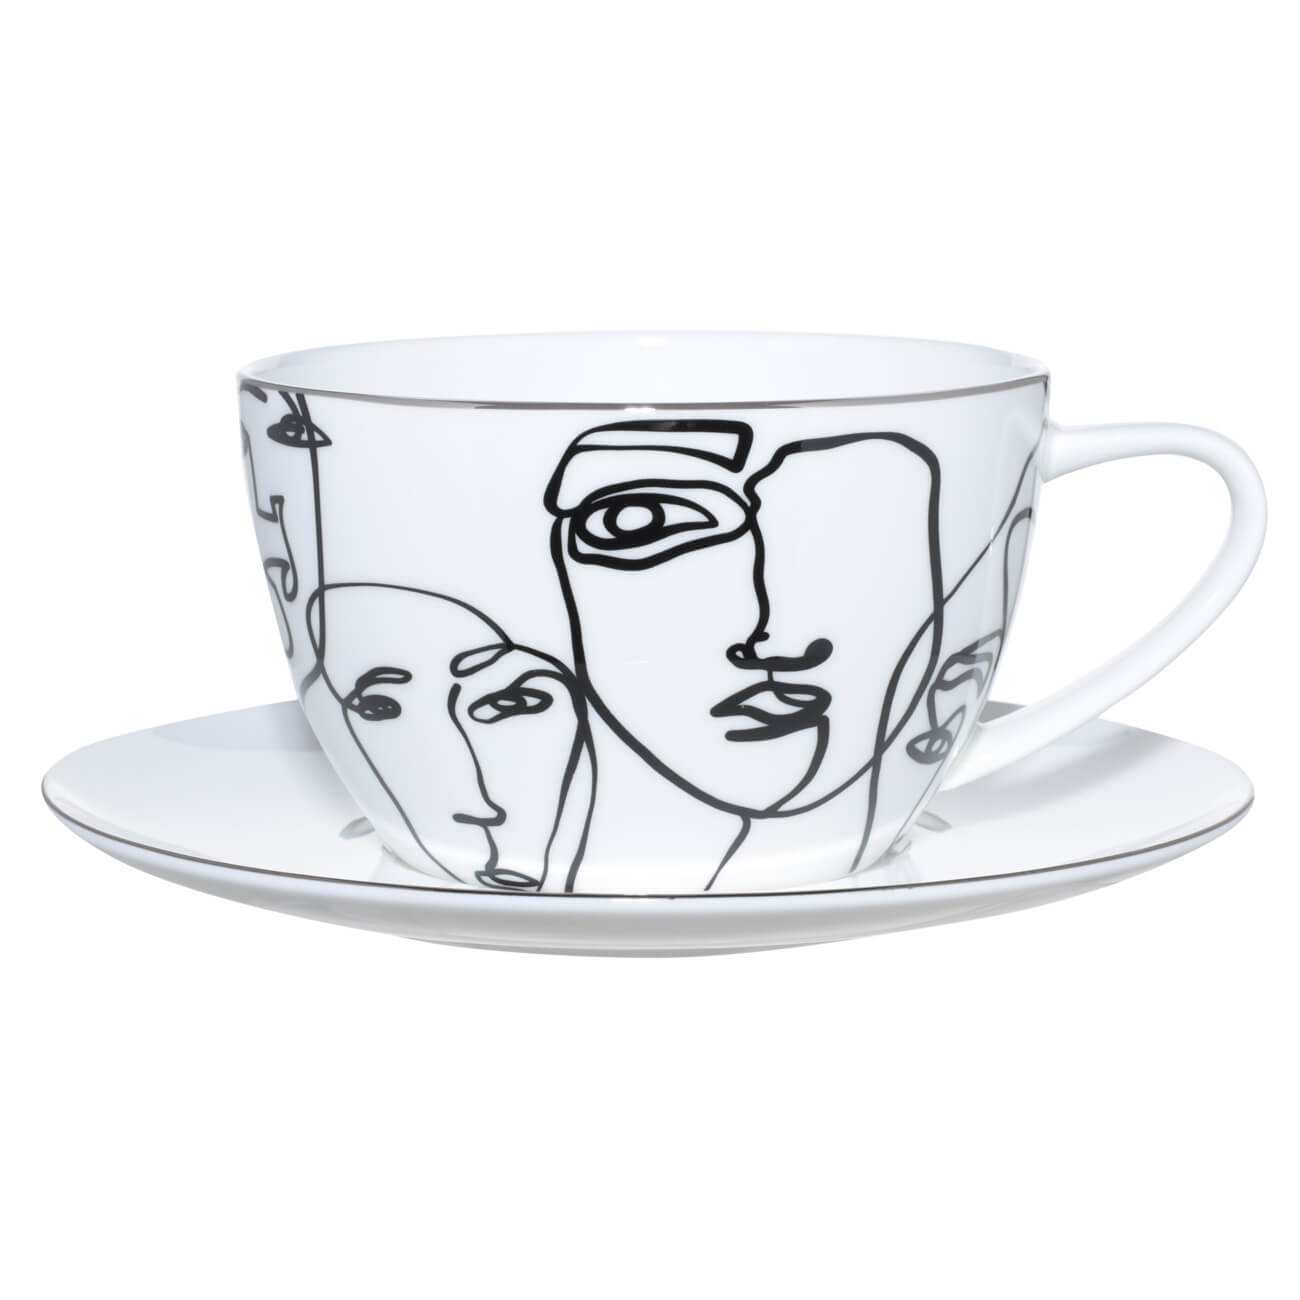 Pair of tea bags for breakfast, 1 pers, 2 items, 480 ml, porcelain F, white, Contoured faces, Face изображение № 1